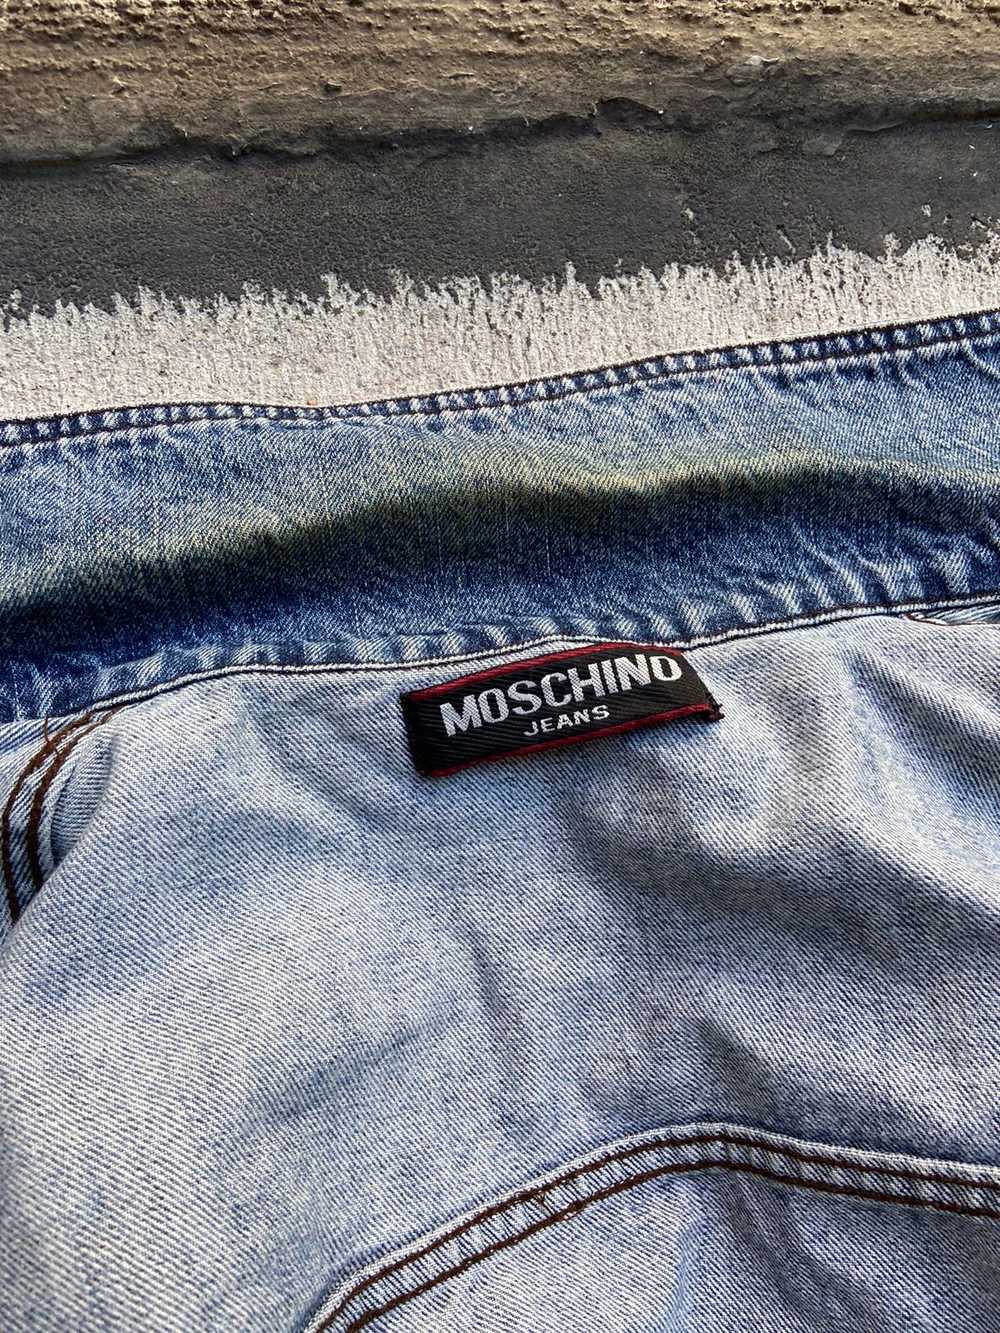 Moschino × Vintage Vintage Moschino Jeans Blue De… - image 4